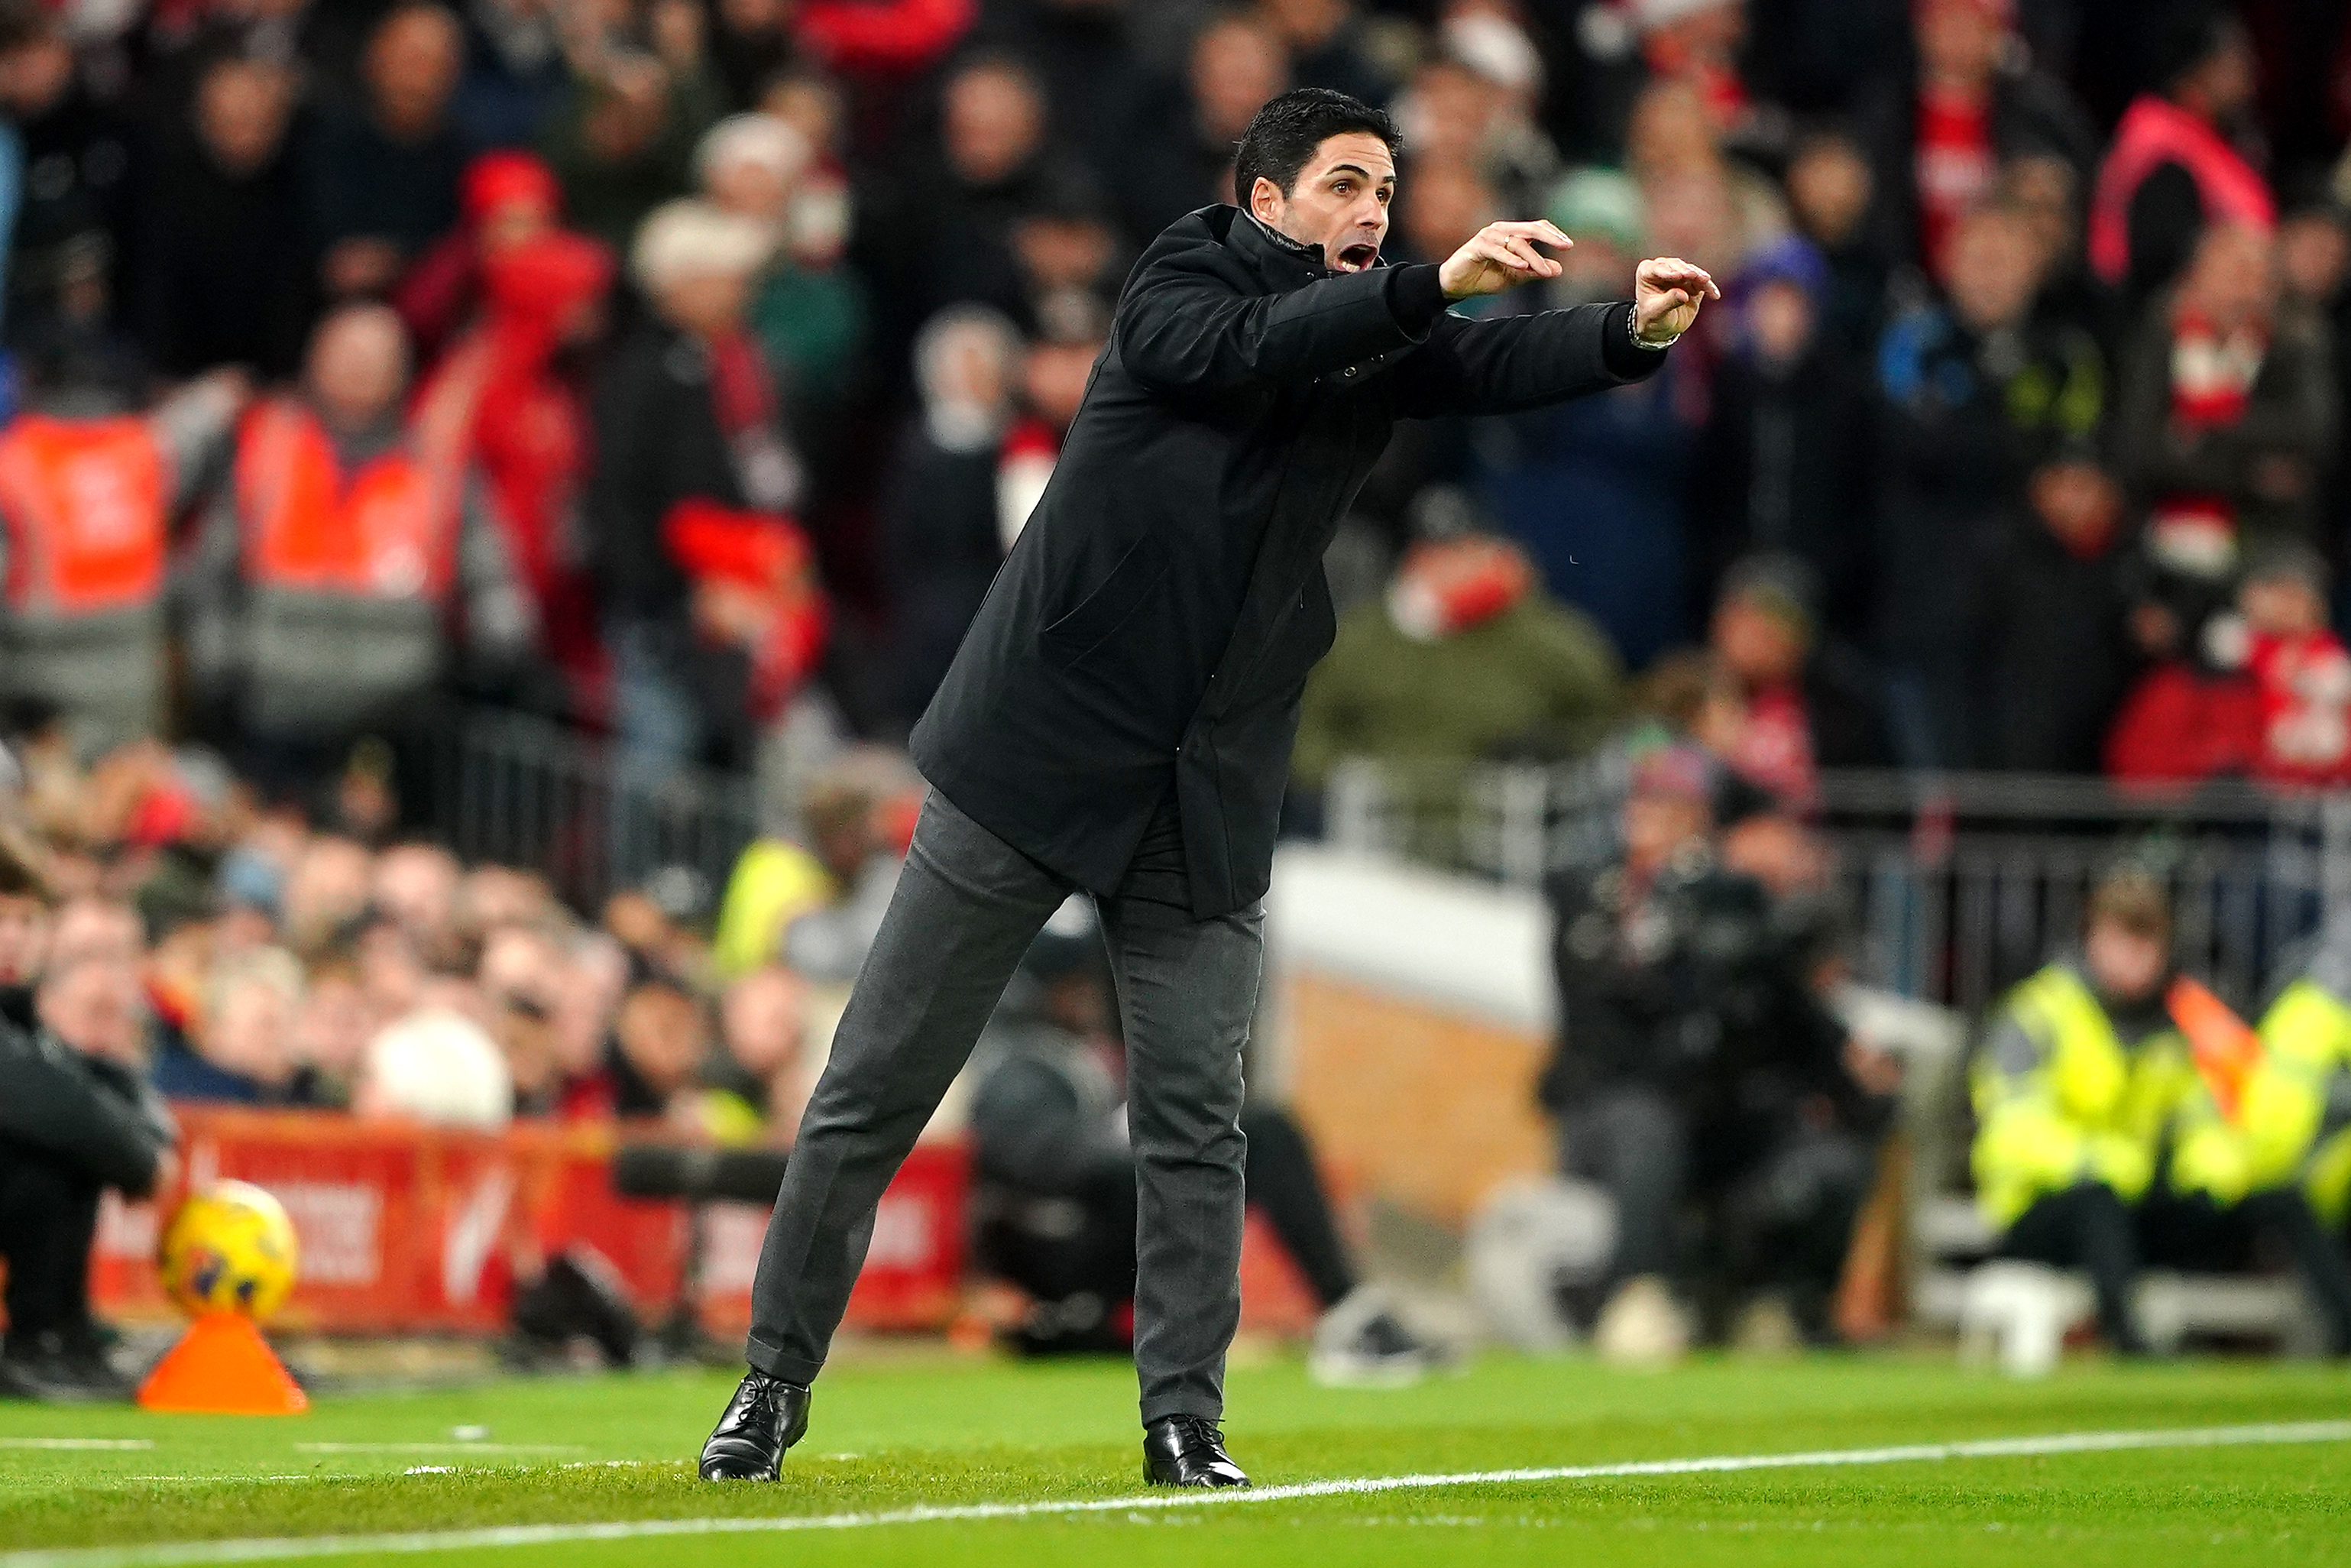 Arsenal manager Mikel Arteta reacts on the touchline